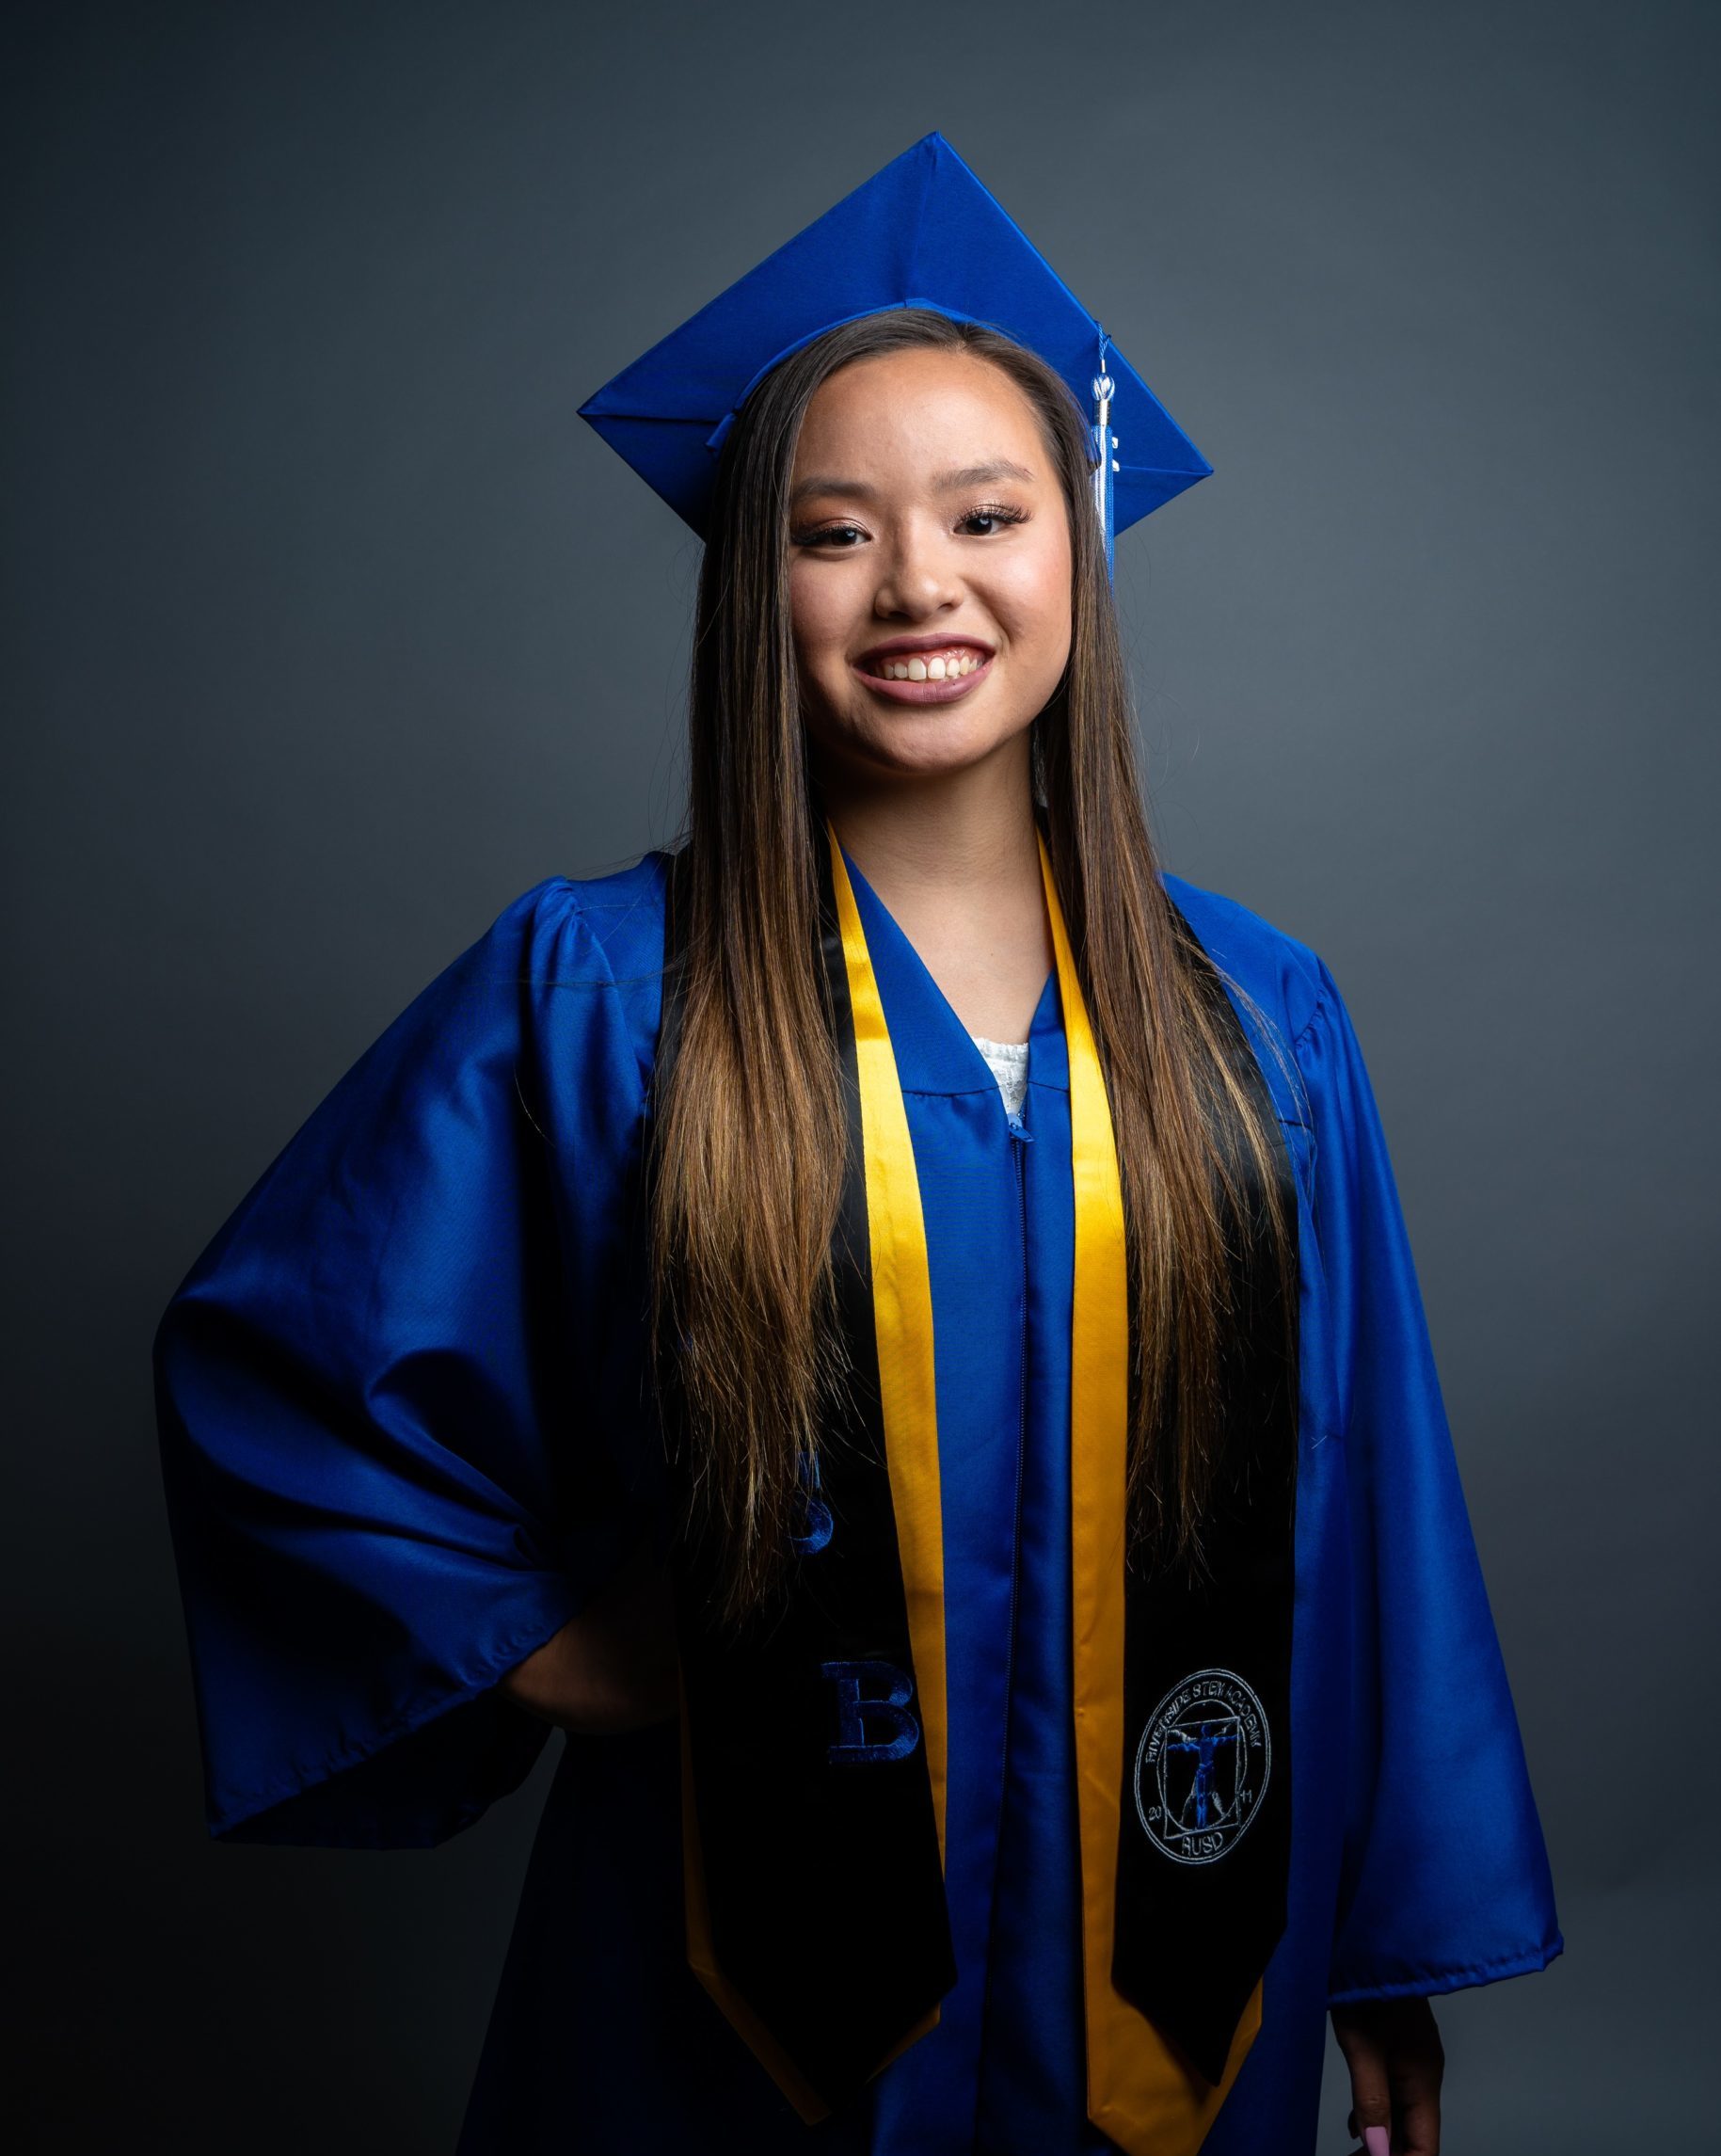 smiling girl standing with one hand on hips wearing blue graduation cap and gown